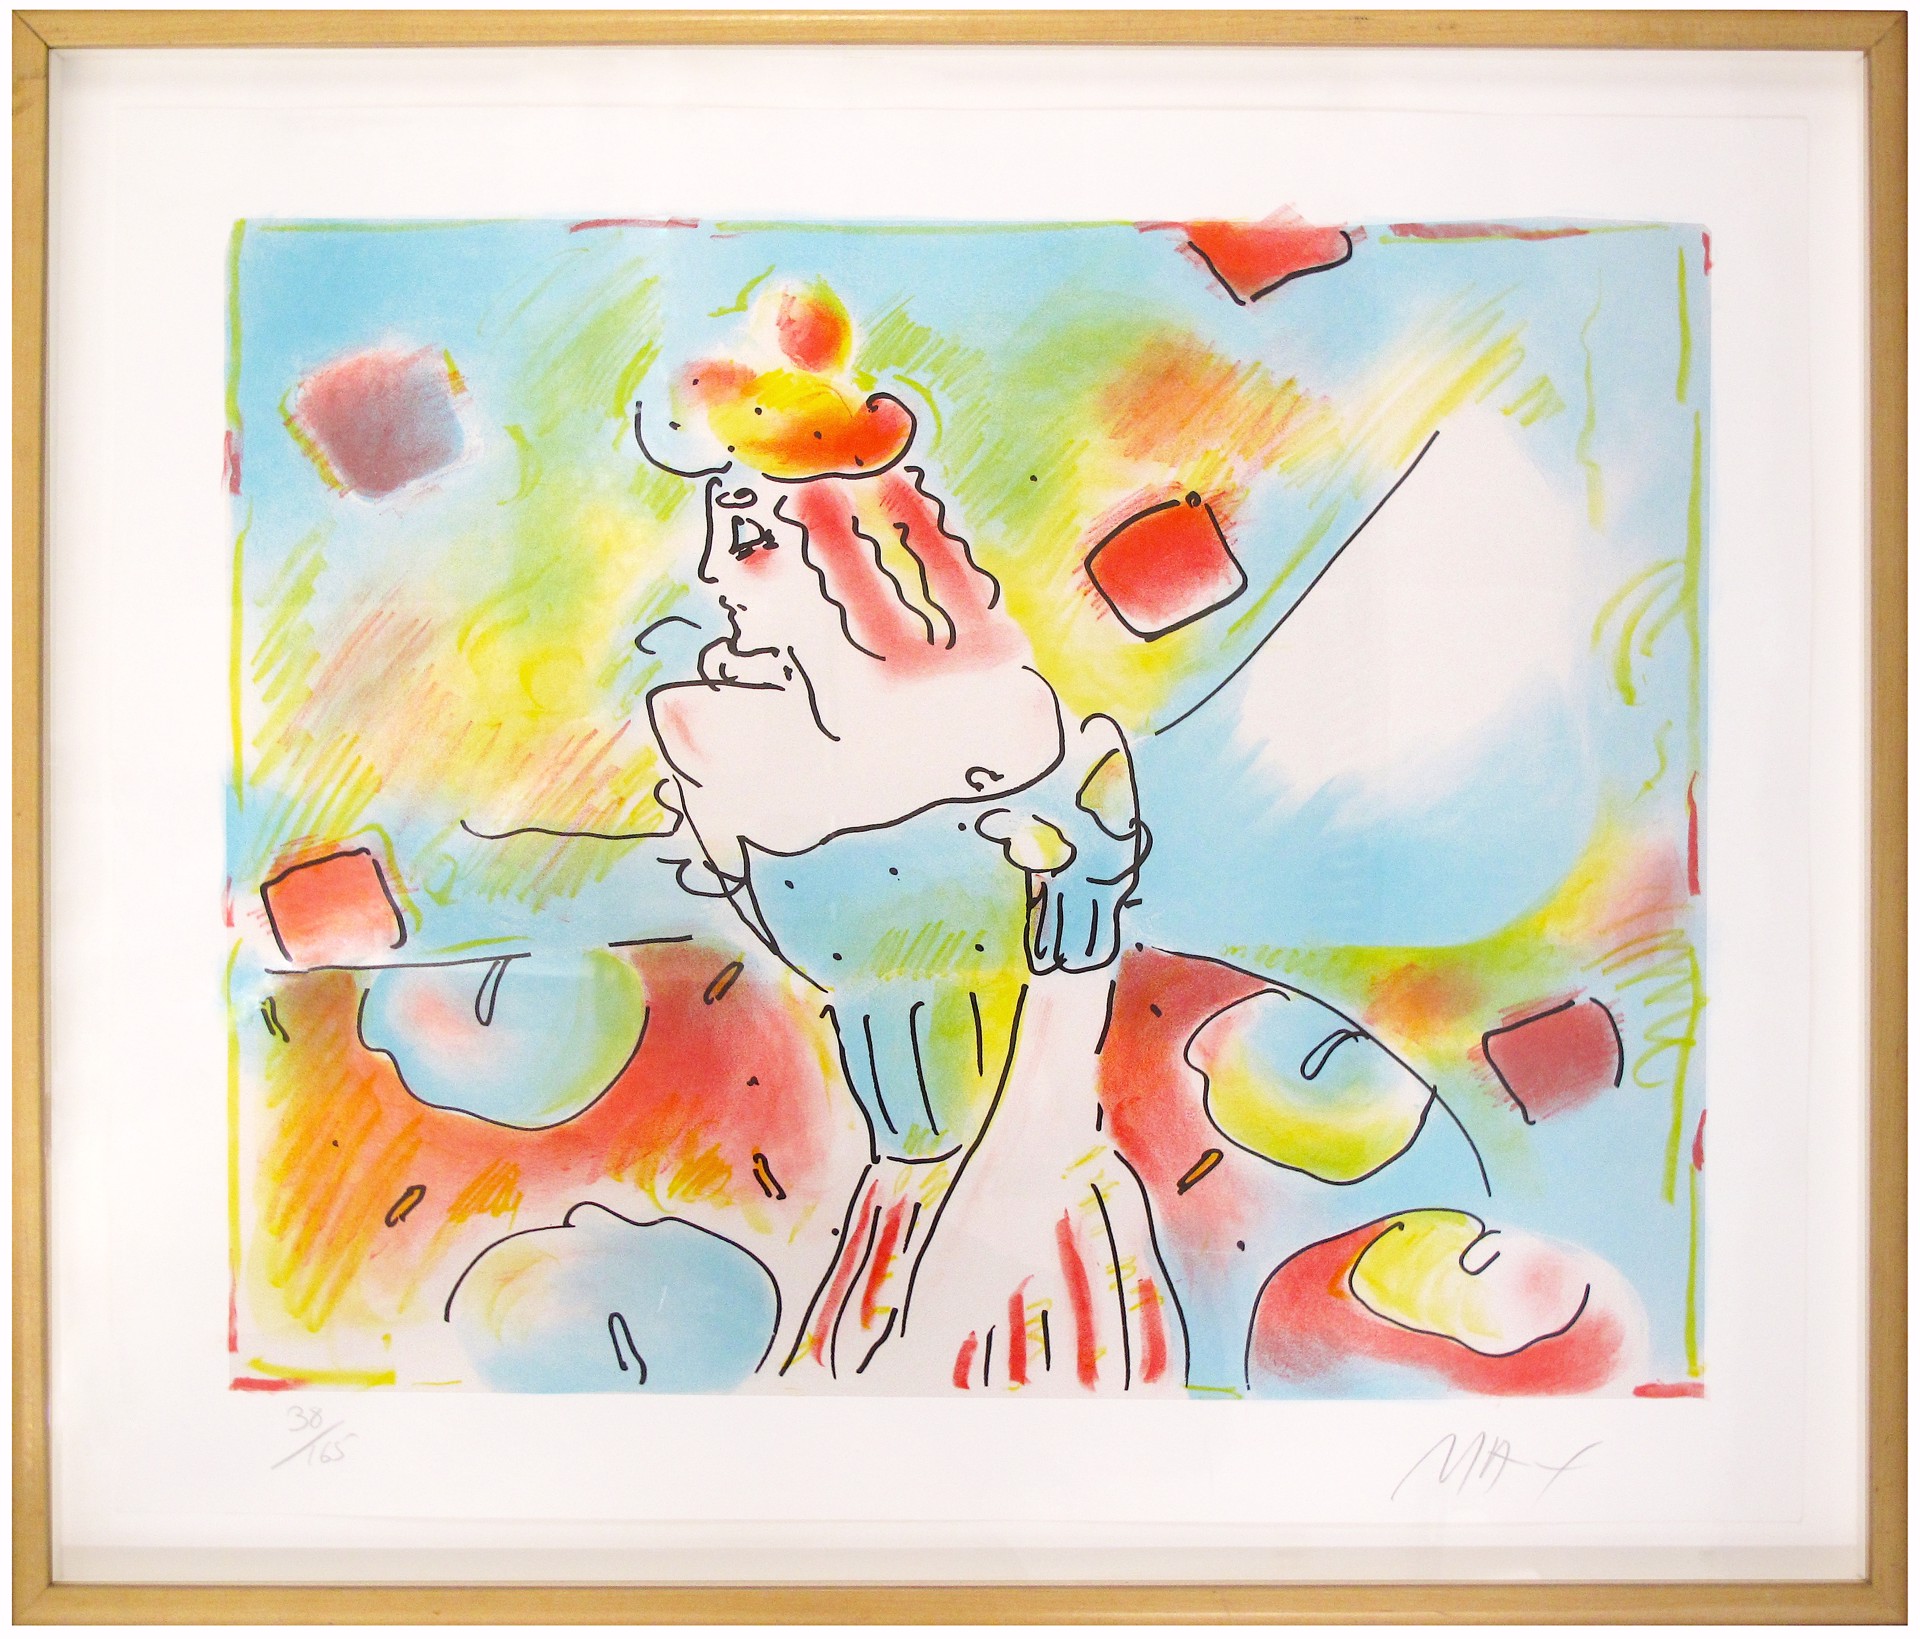 Composition Red and Green by Peter Max